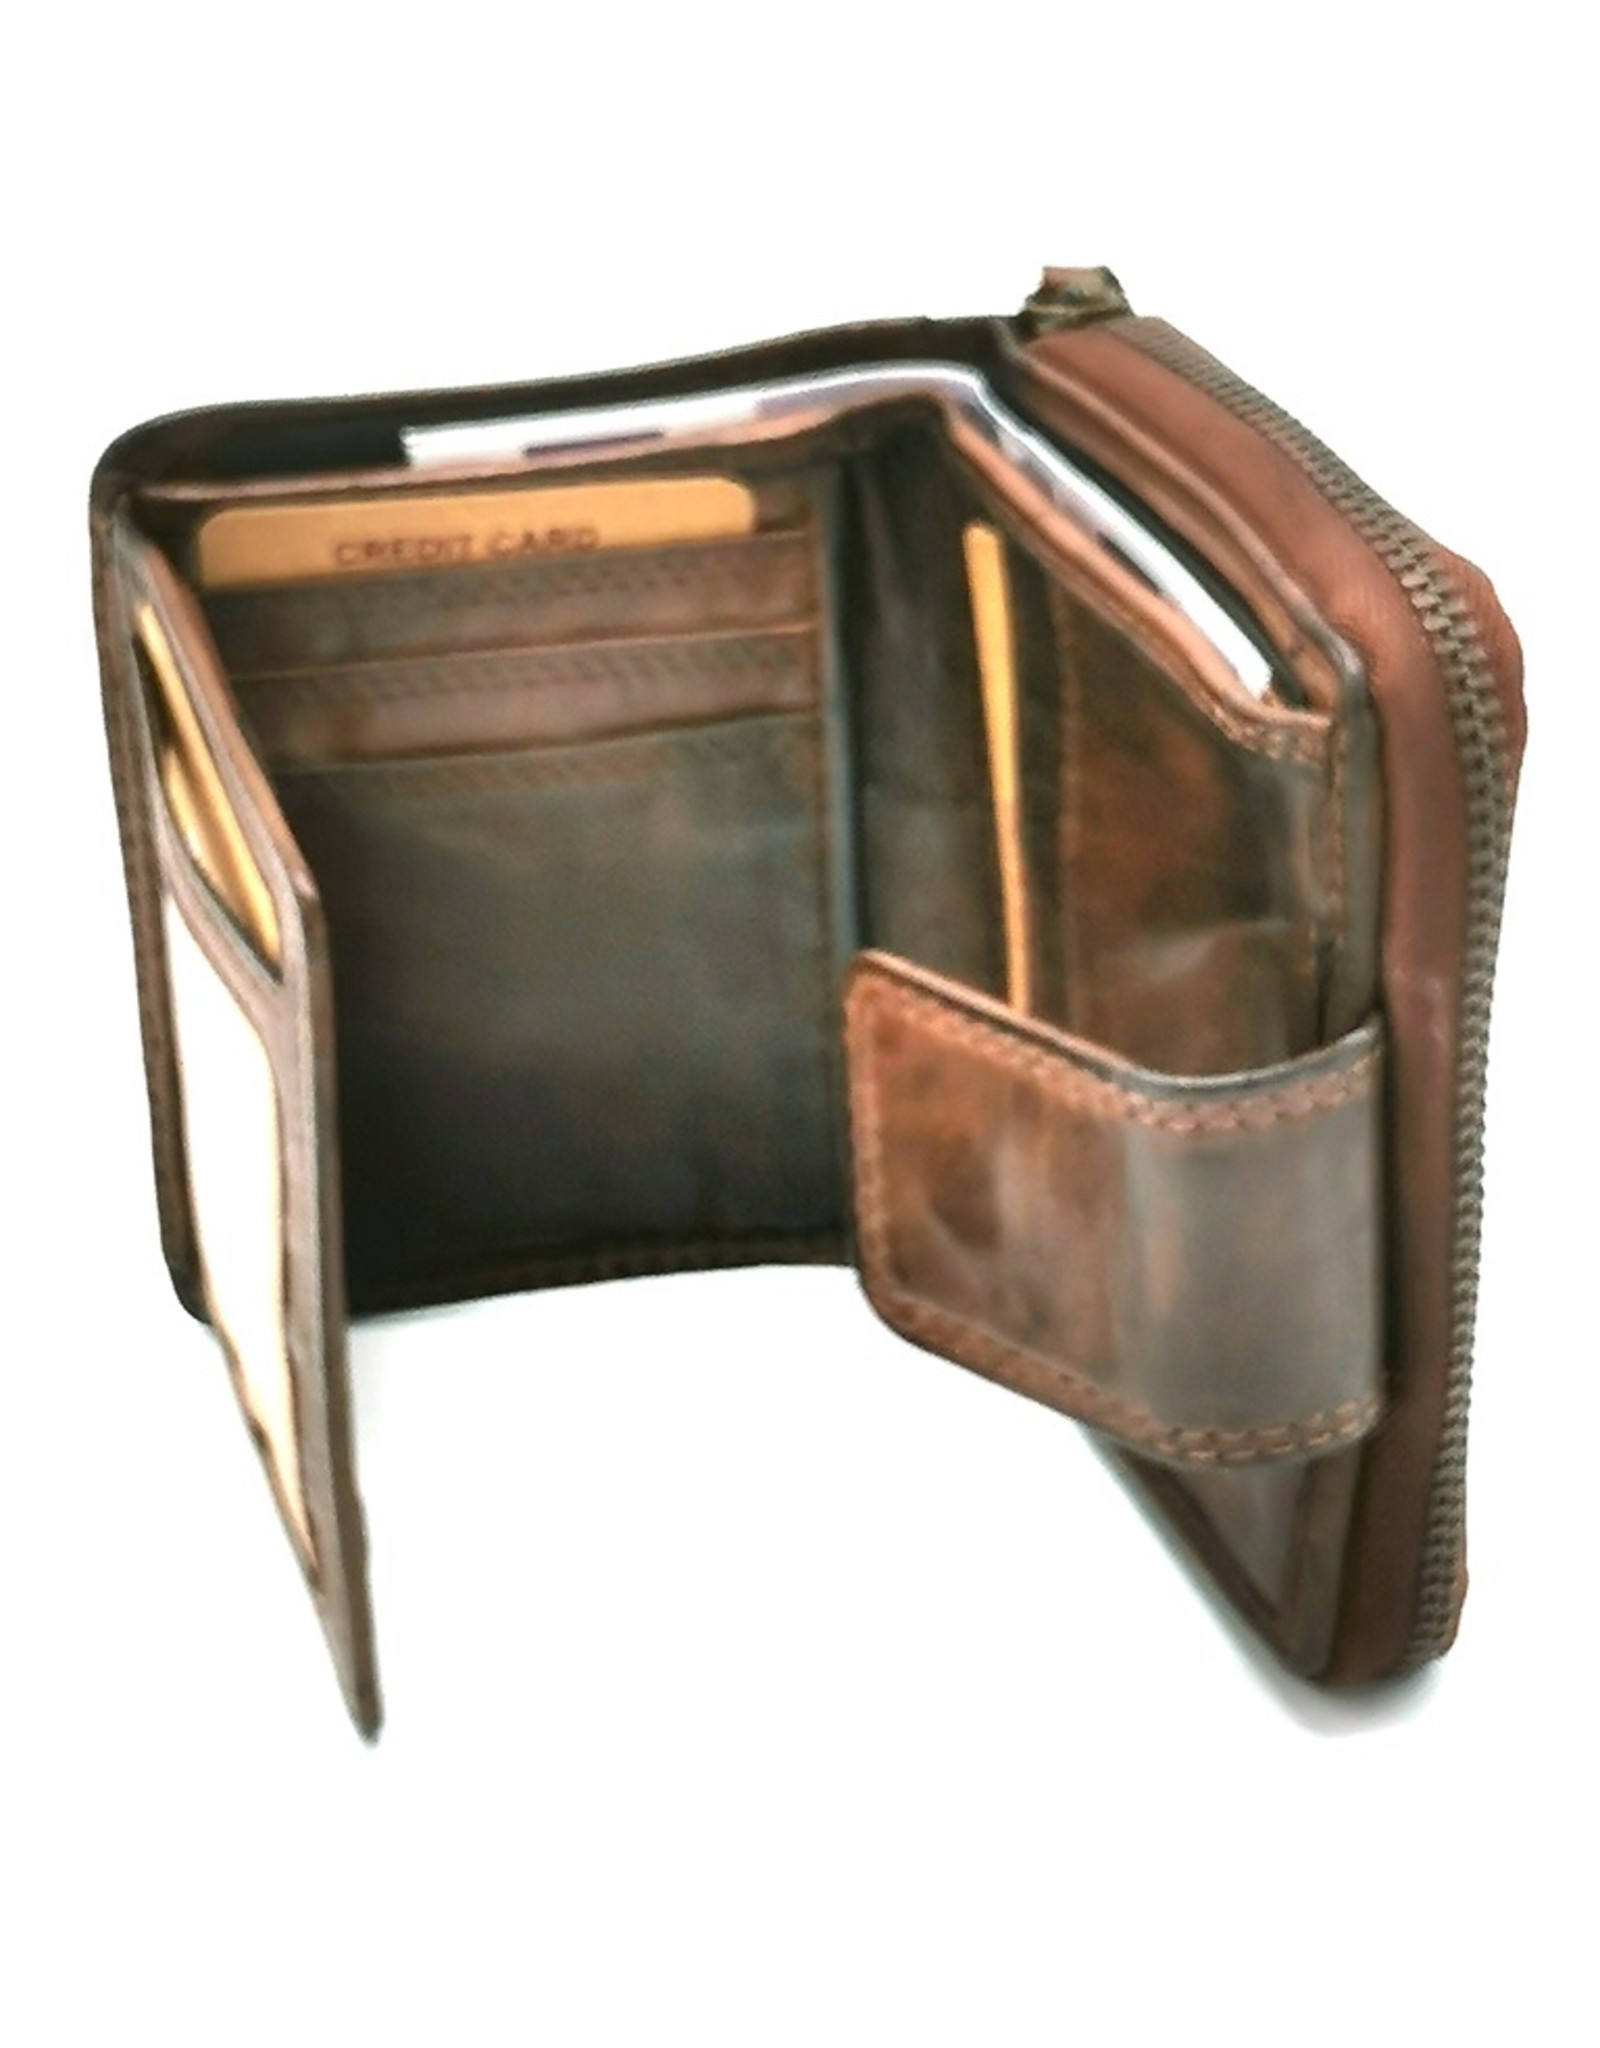 HillBurry Leather Wallets - HillBurry Wallet Washed Leather Brown